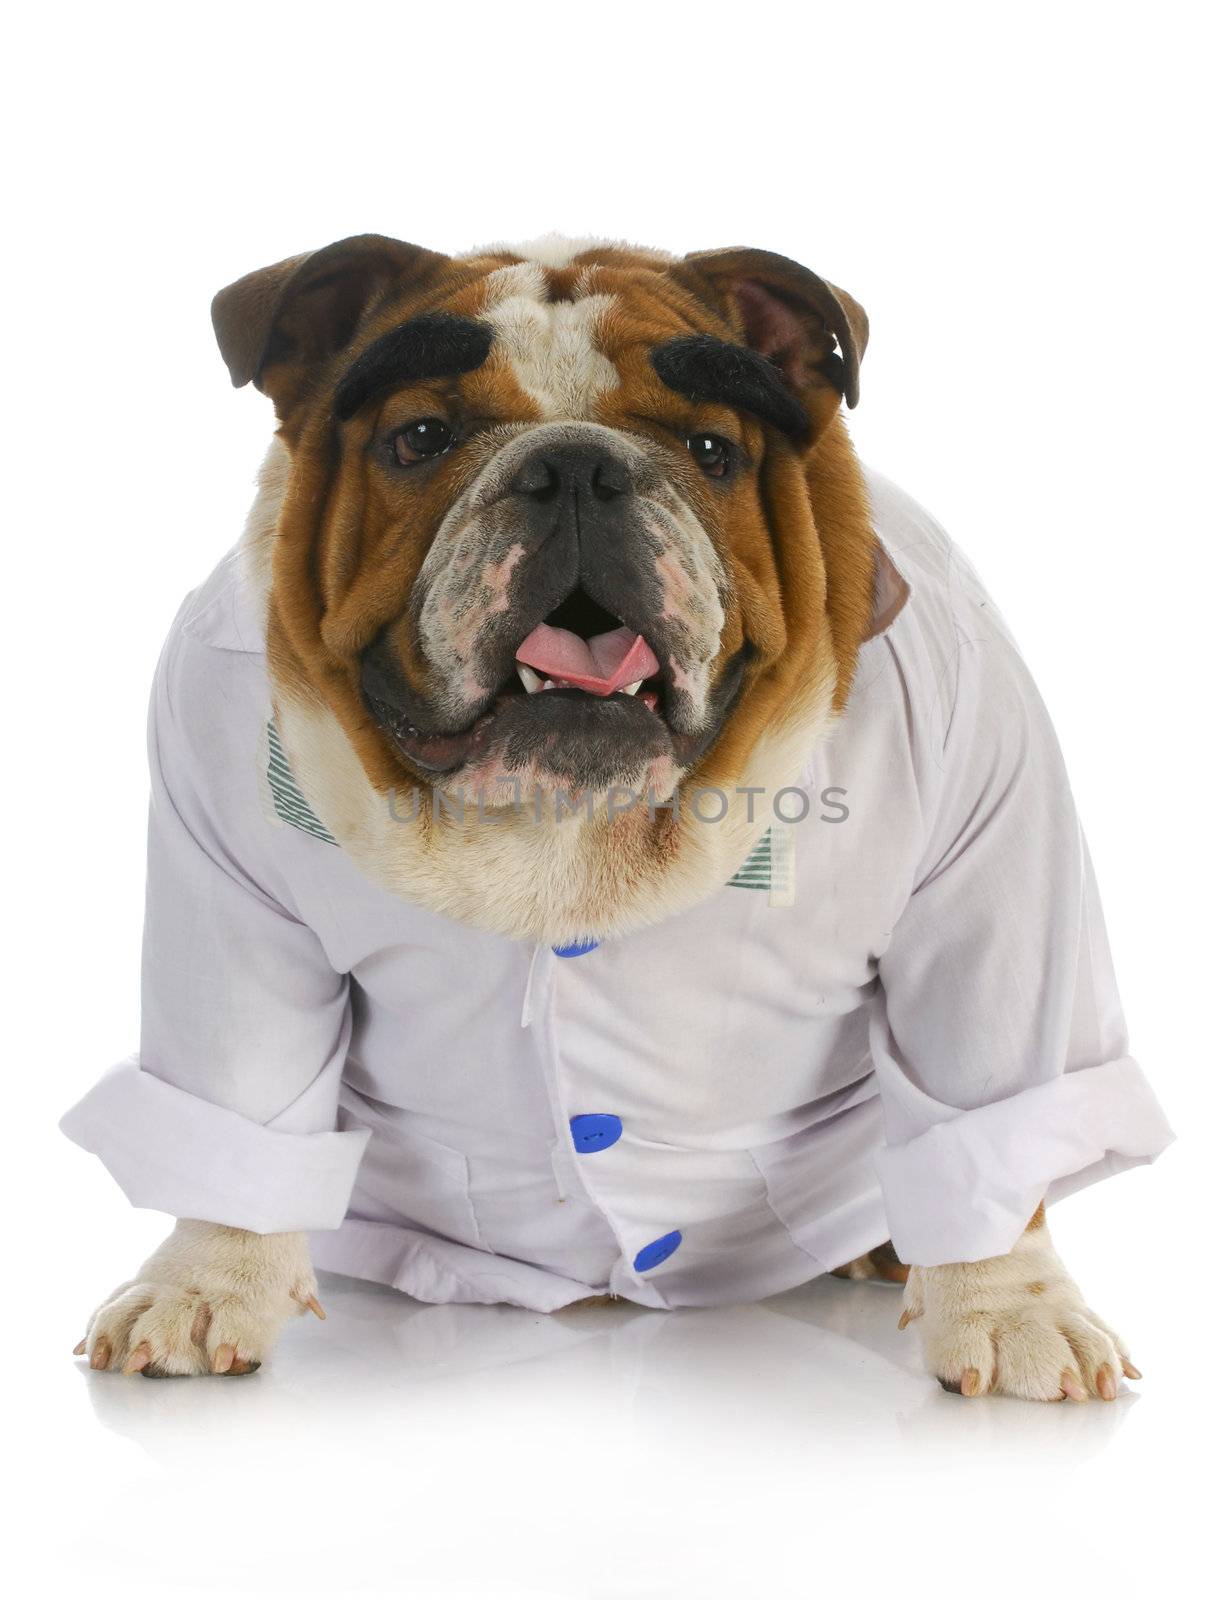 veterinarian - english bulldog dressed up like a vet with reflection on white background